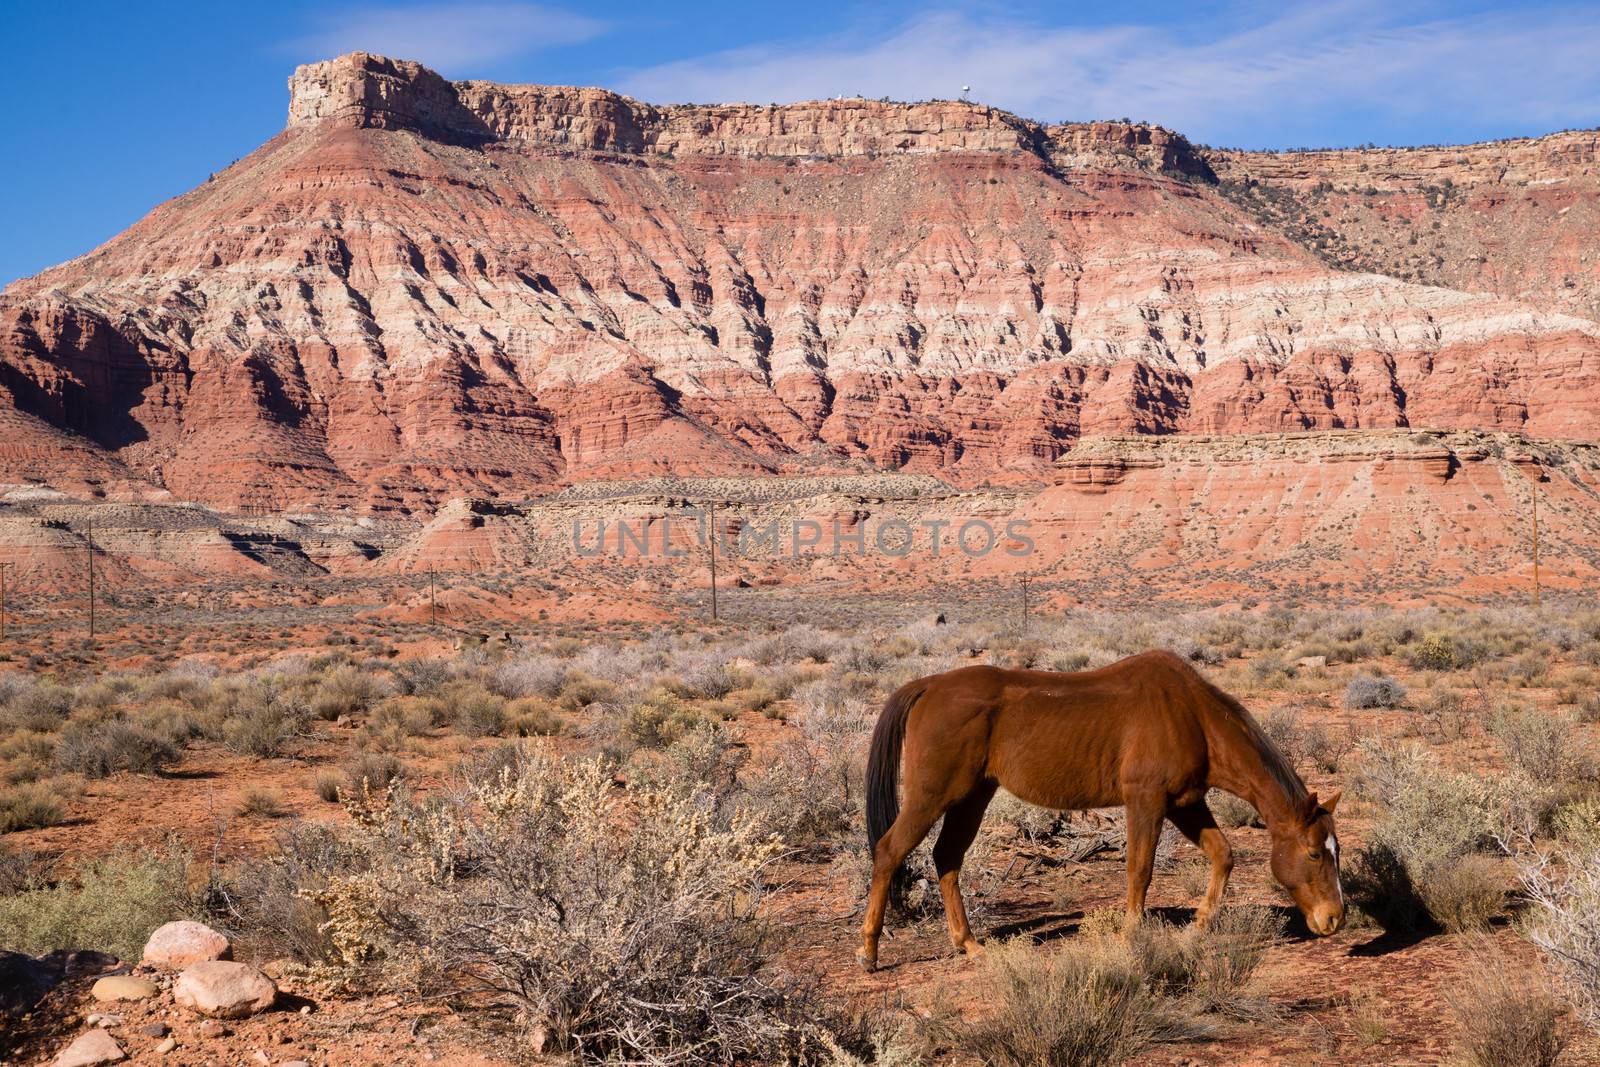 A beautiful horse scours the ground for nutrition in an amazing landscape